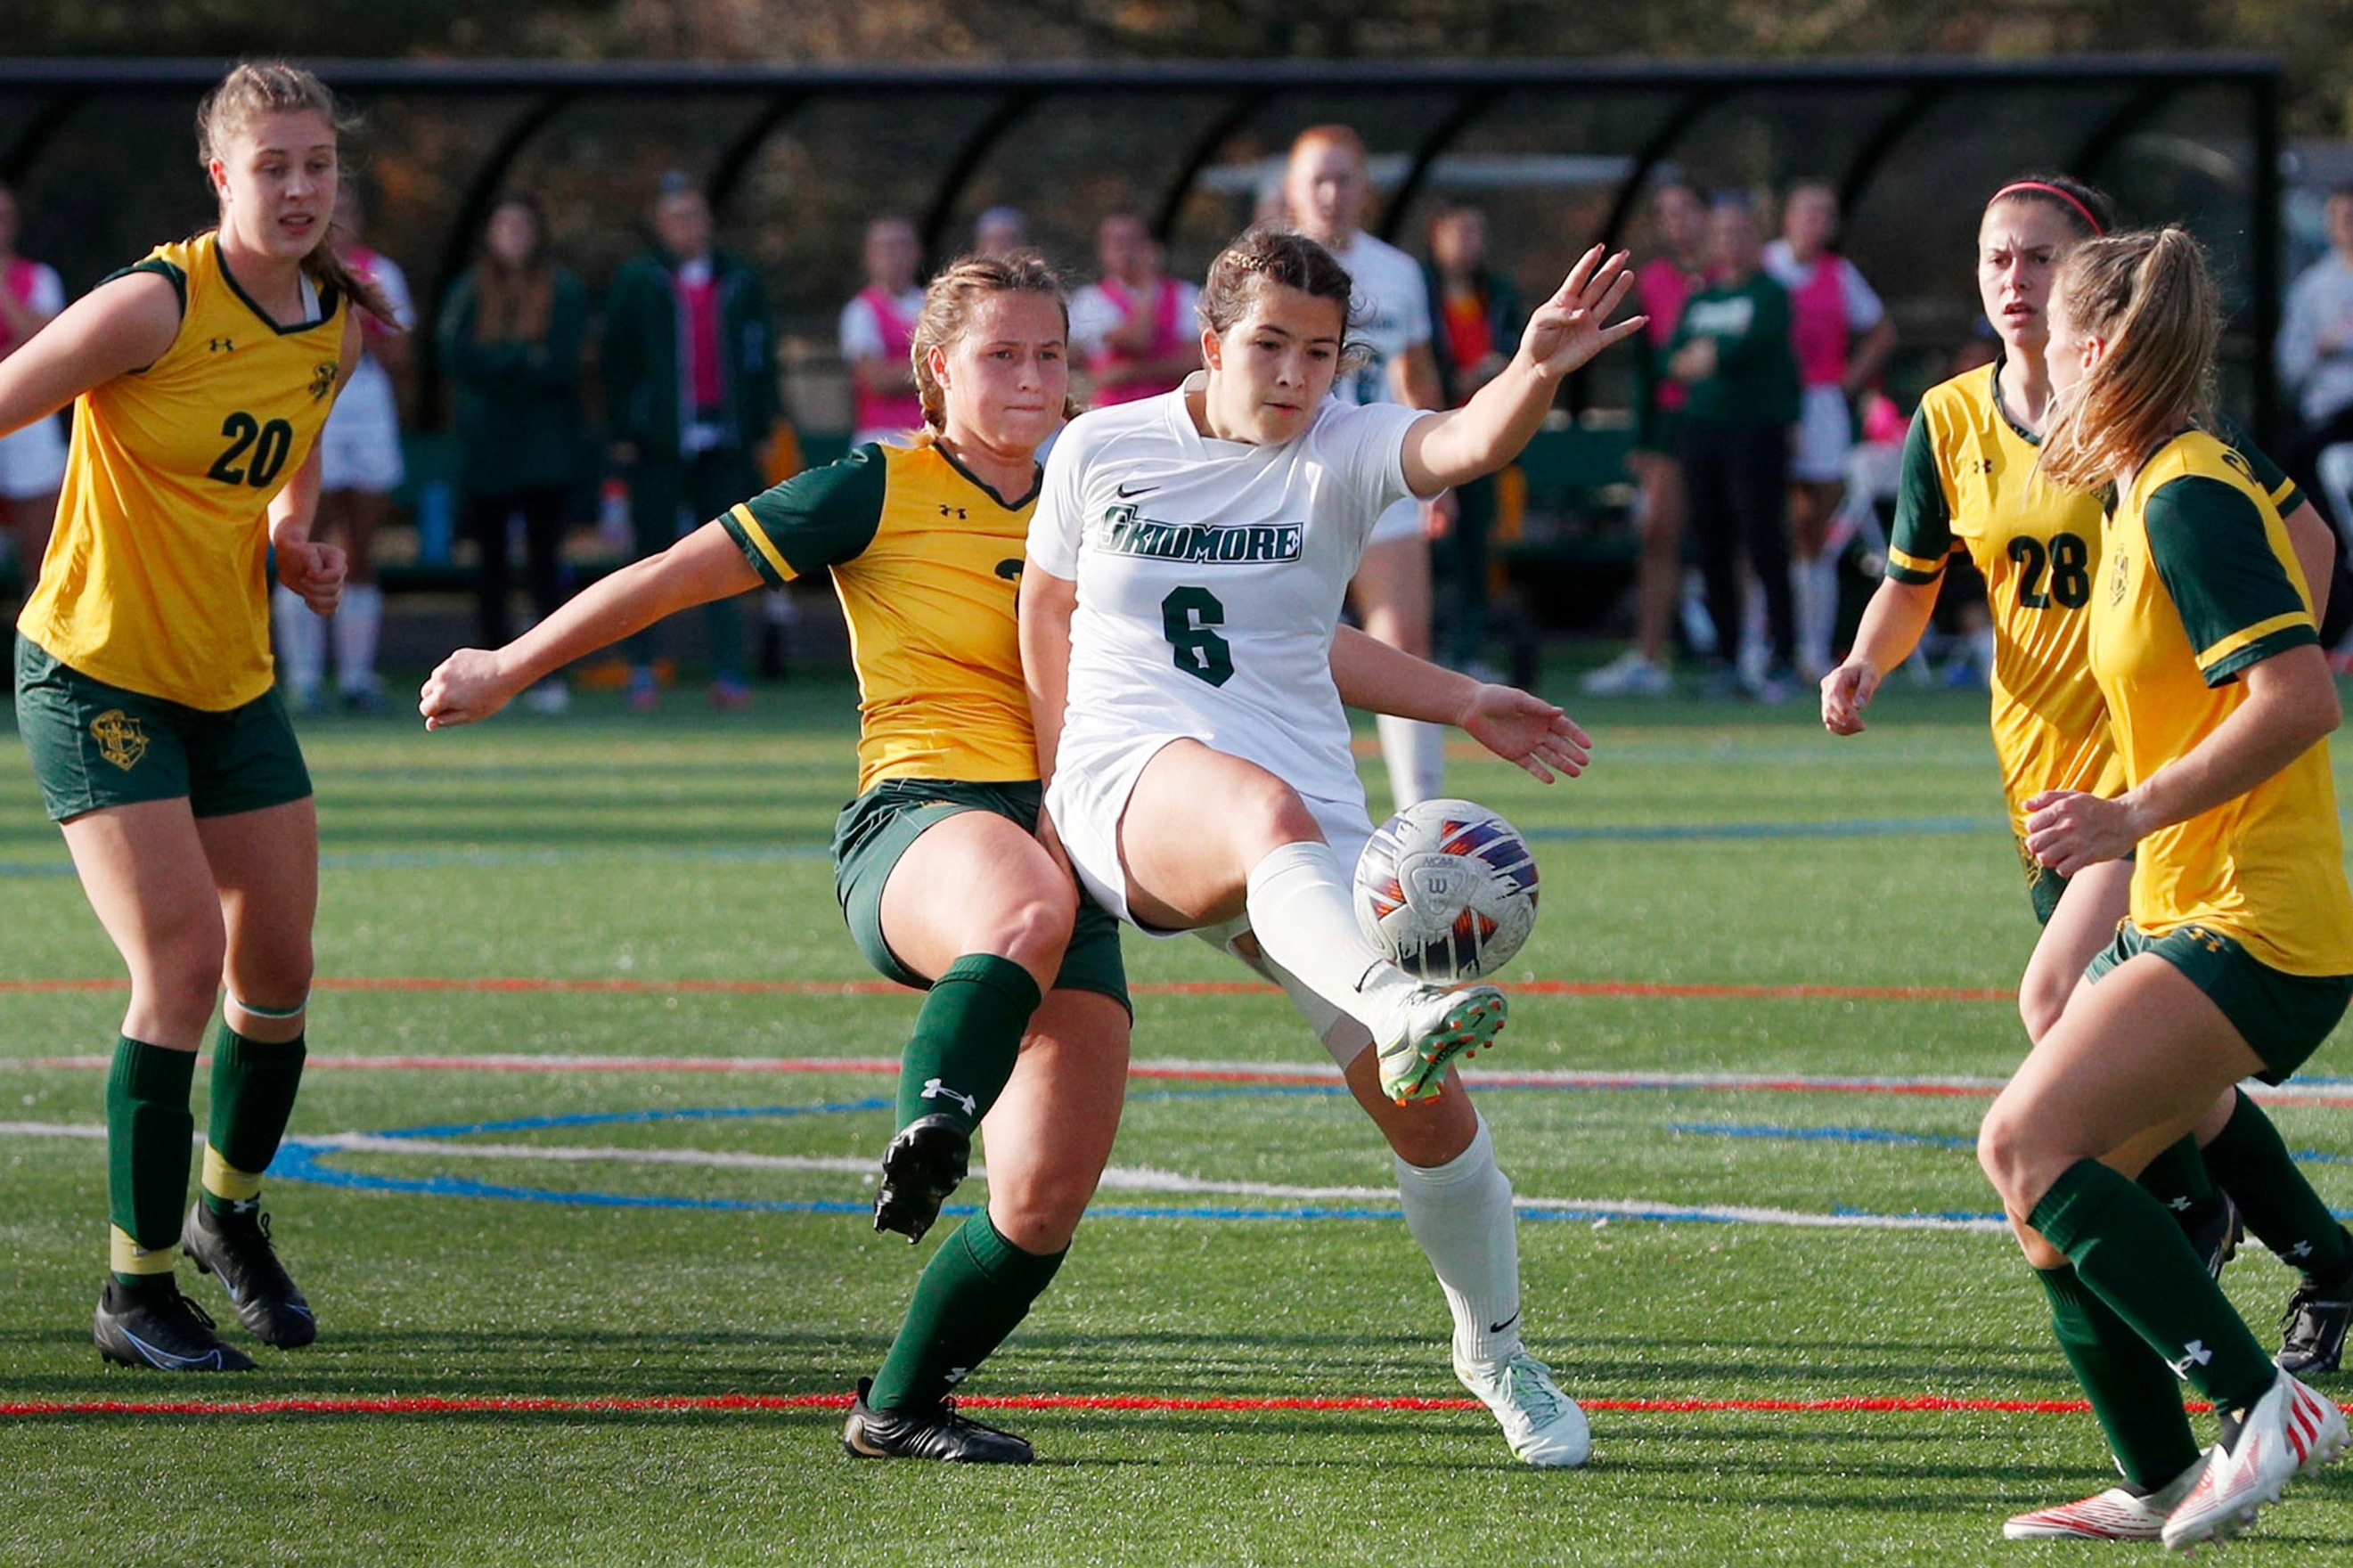 Kat Dunn ’24 rapidly transformed herself from a “super-sub” hoping for game time to ¼ϲʿ